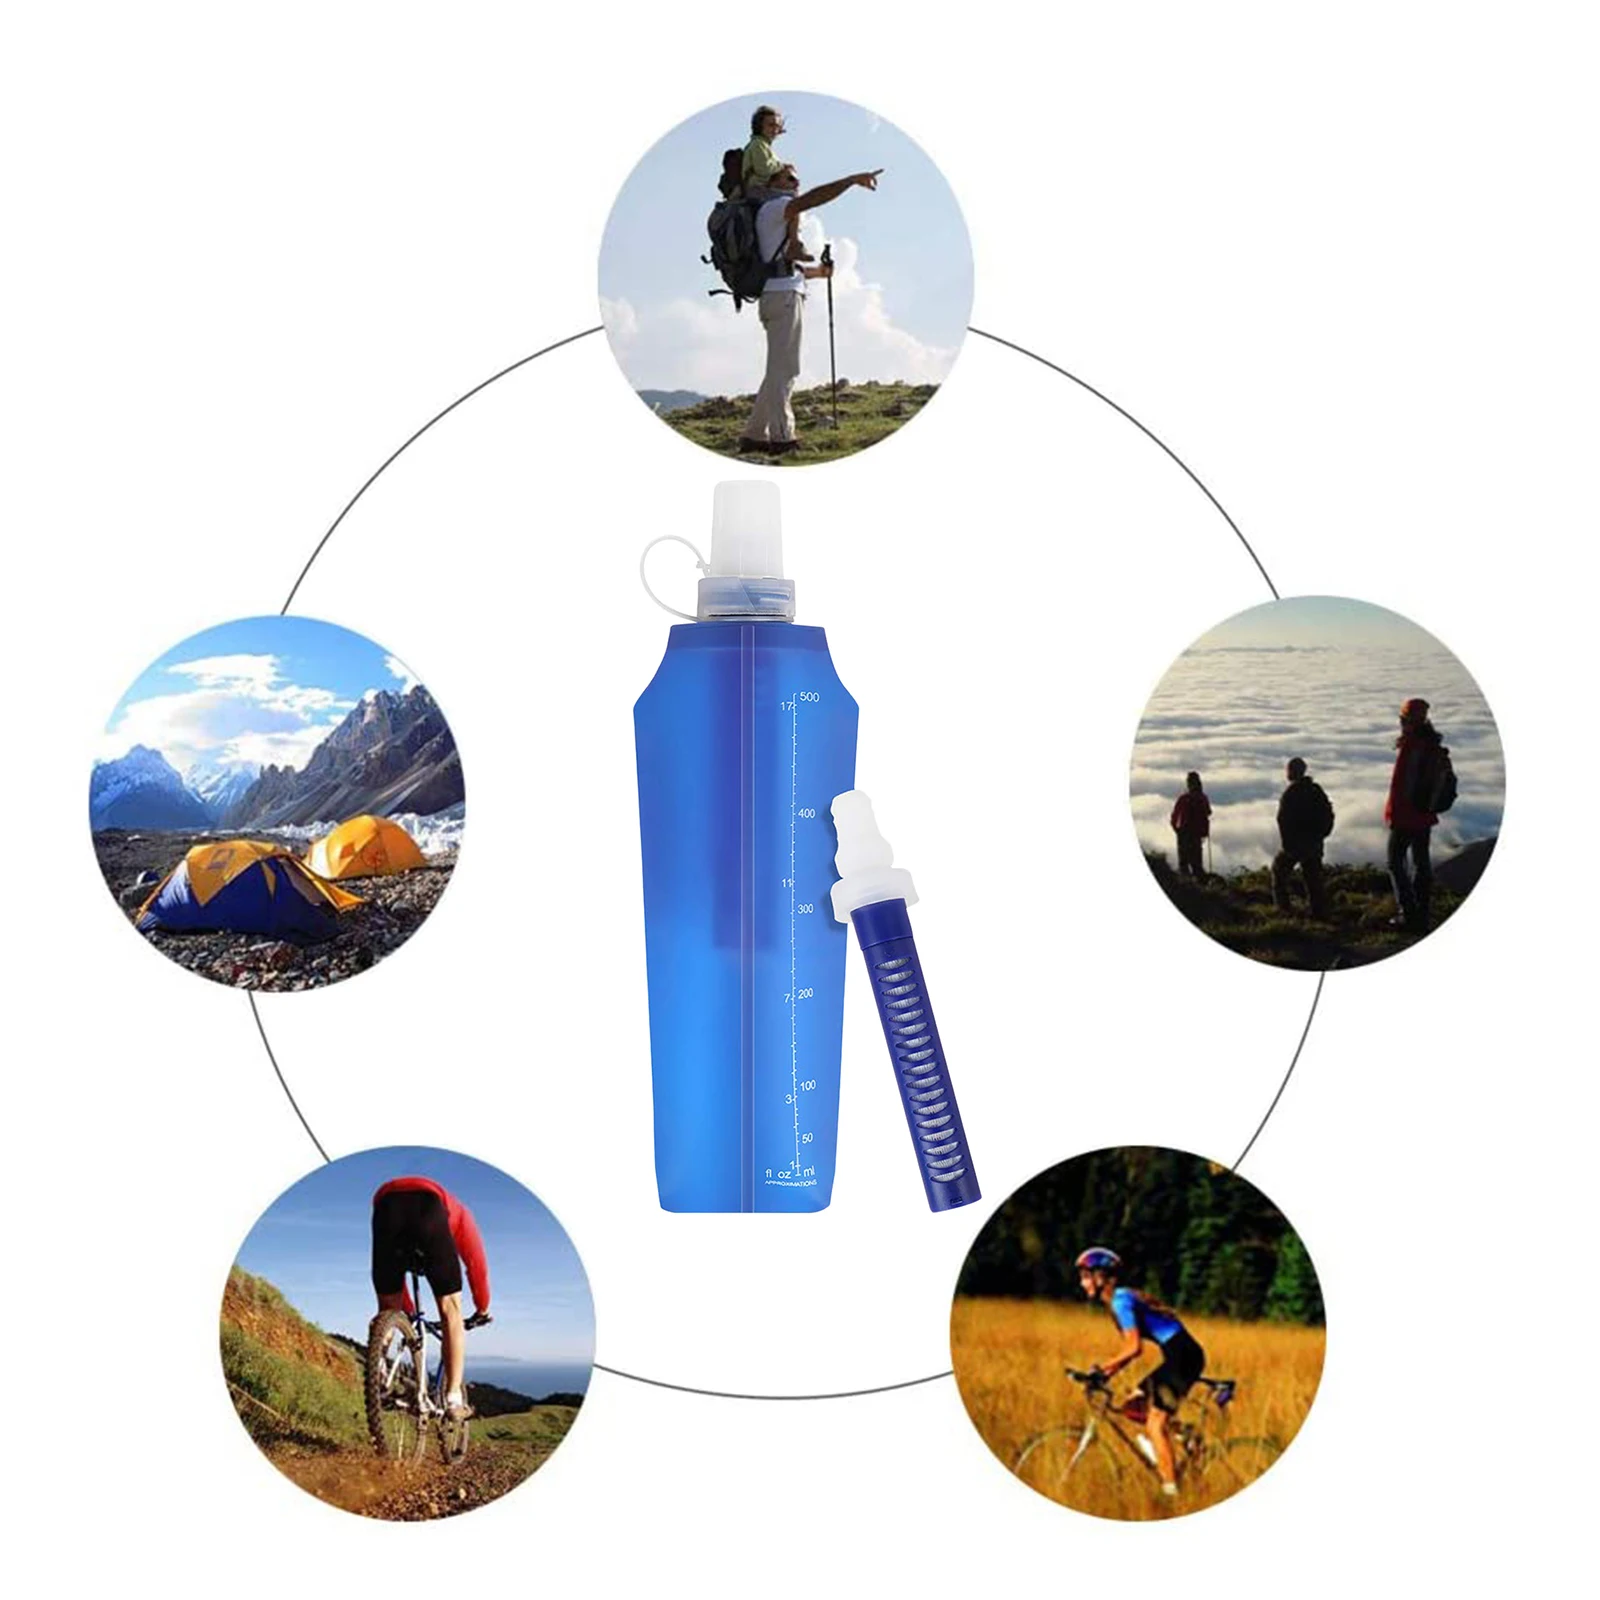 Water Filter Bag Collapsible Flexible Outdoor Water Filtration Bottle for Outdoor Emergency Survival Camping Hiking